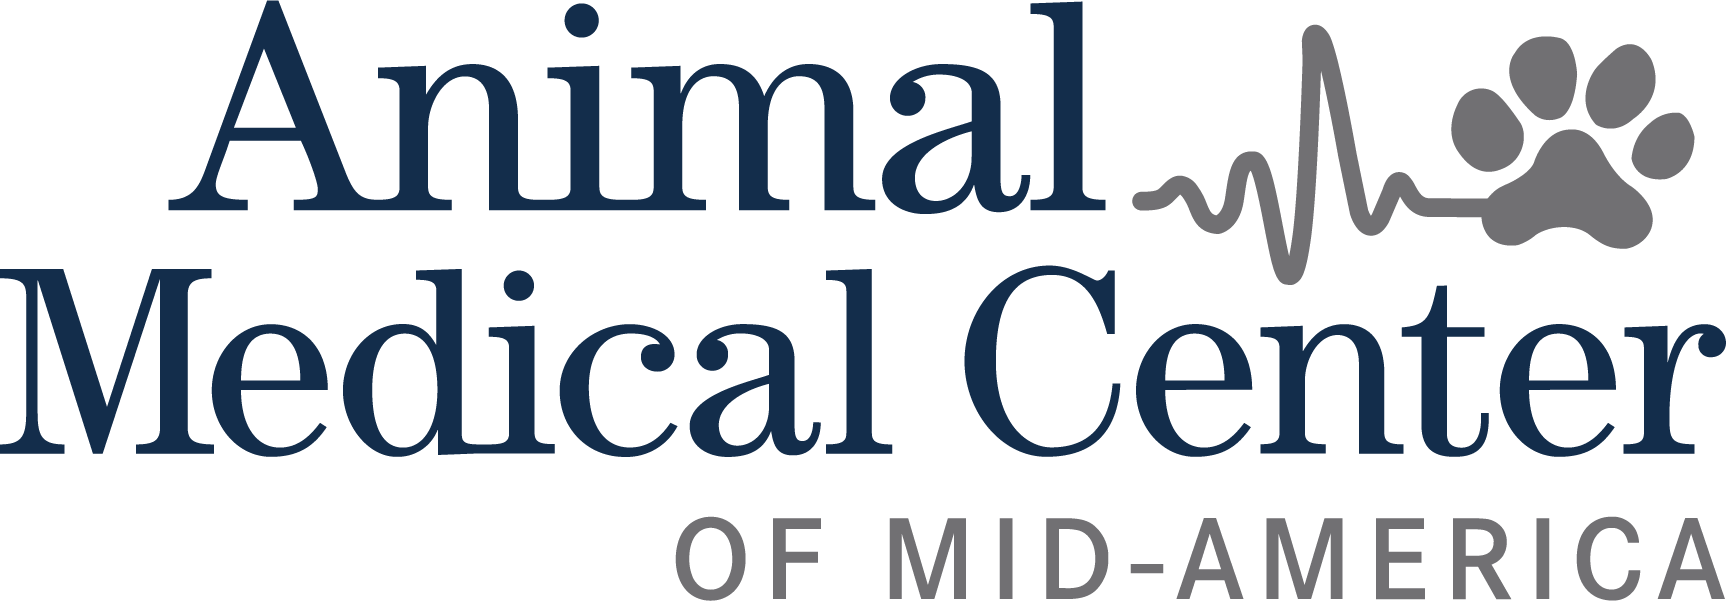 Animal Medical Center of Mid America - Maryland Heights Logo